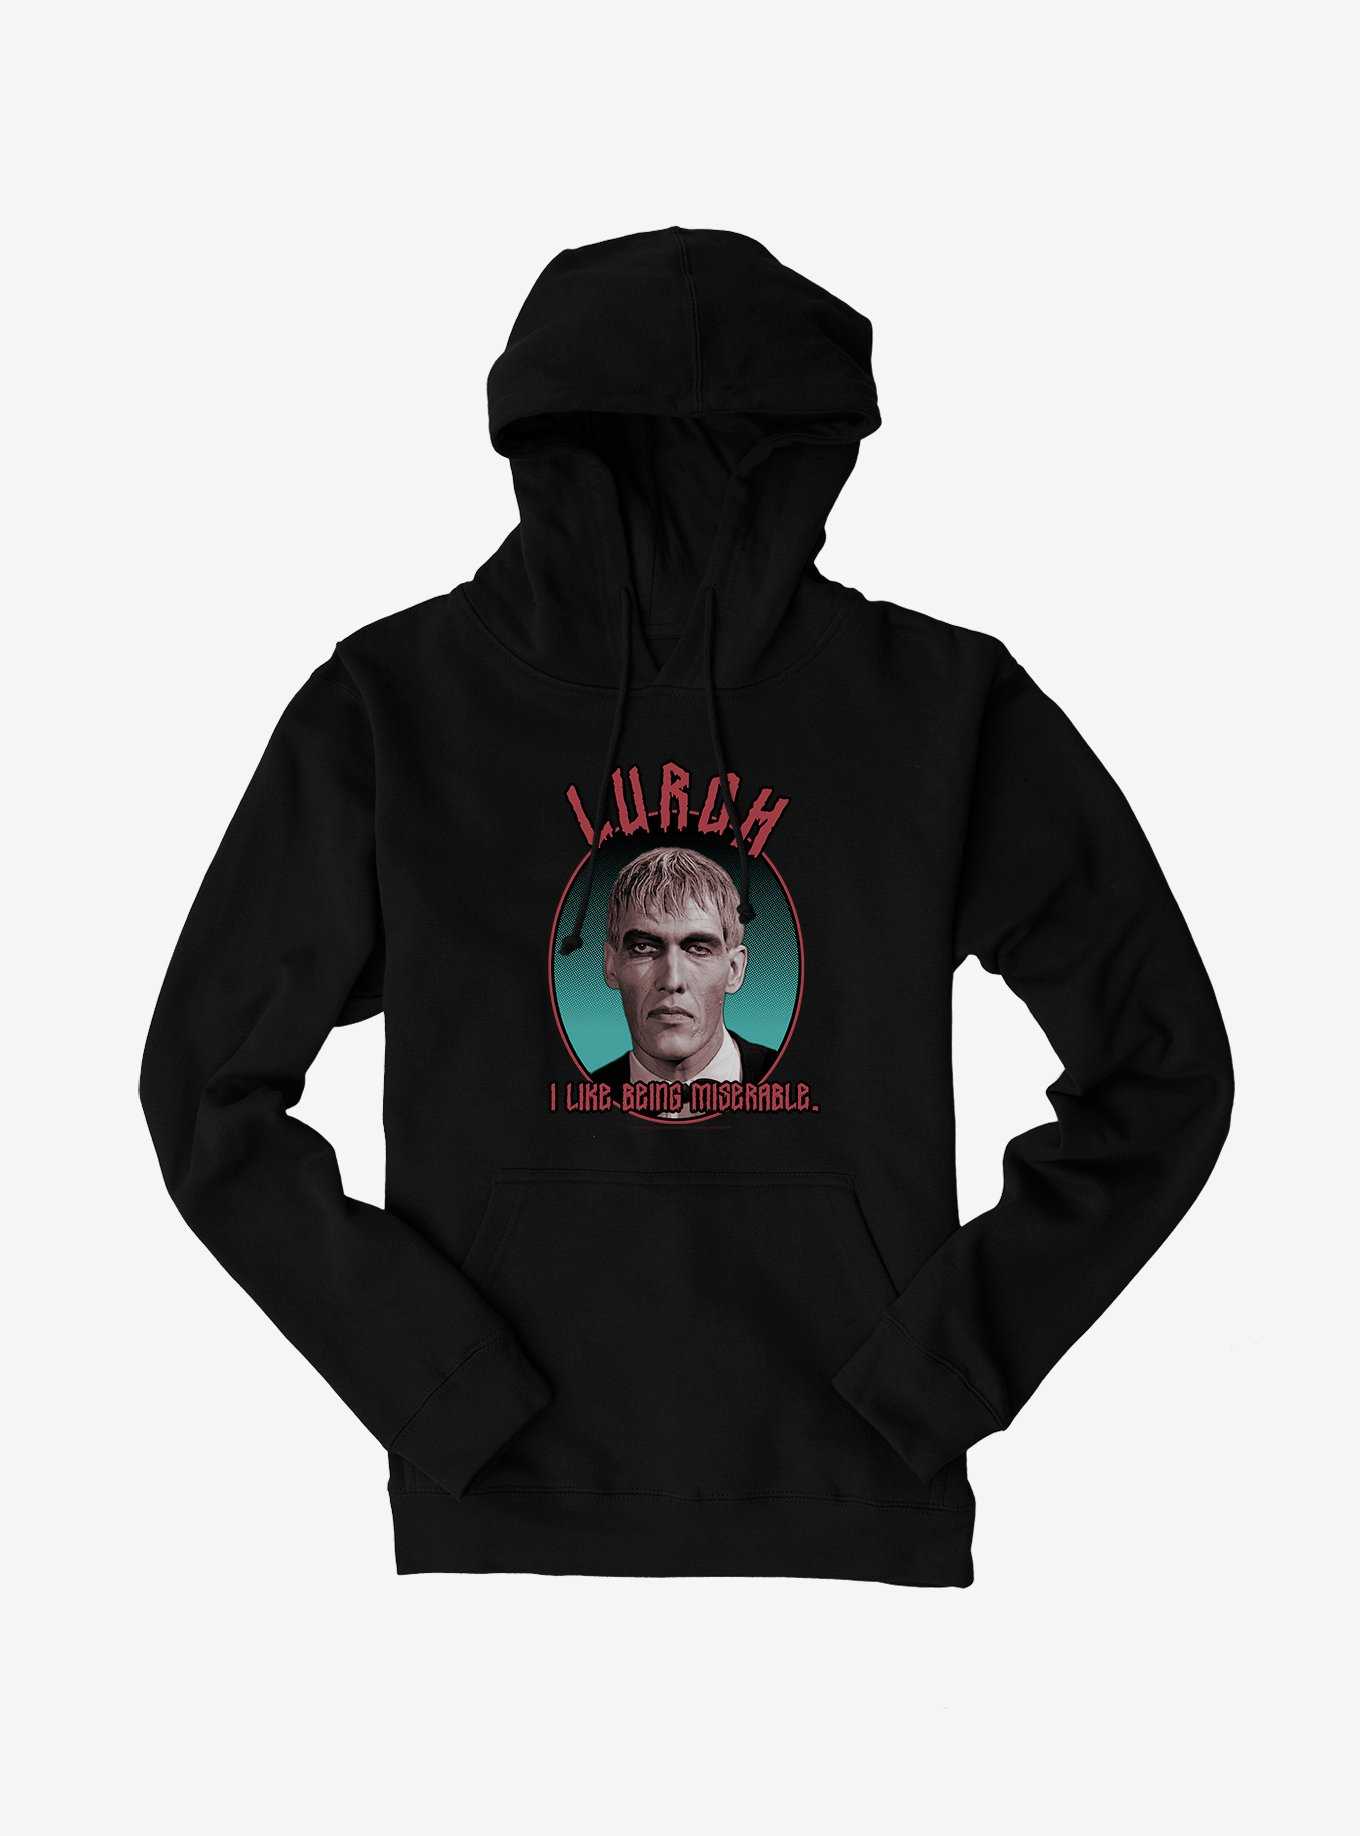 The Addams Family Lurch Hoodie, , hi-res